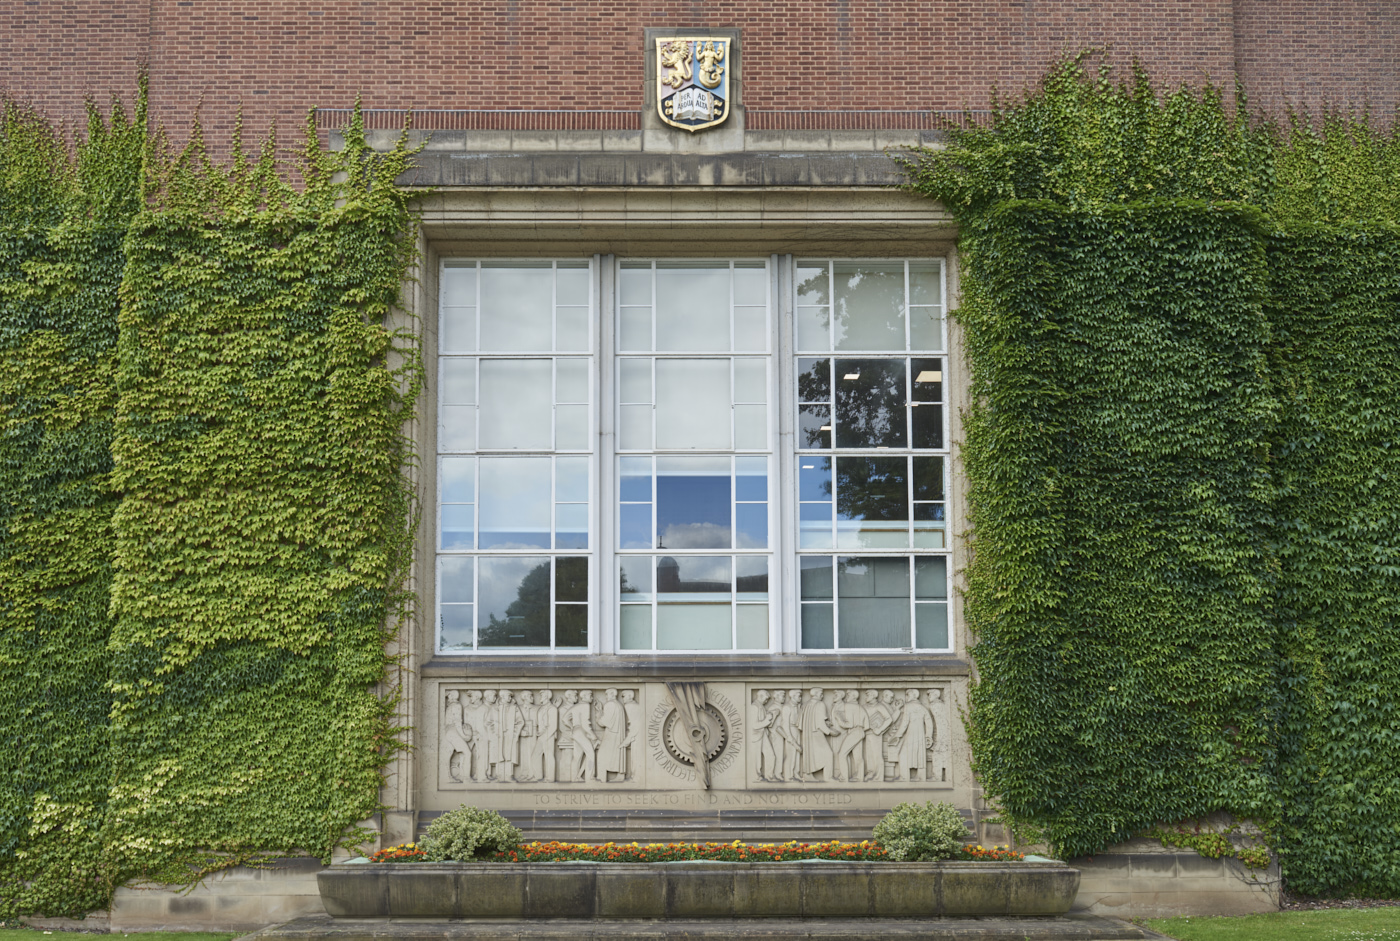 Stone carved Engineering Frieze by William Bloye in context of Engineering Building covered in ivy